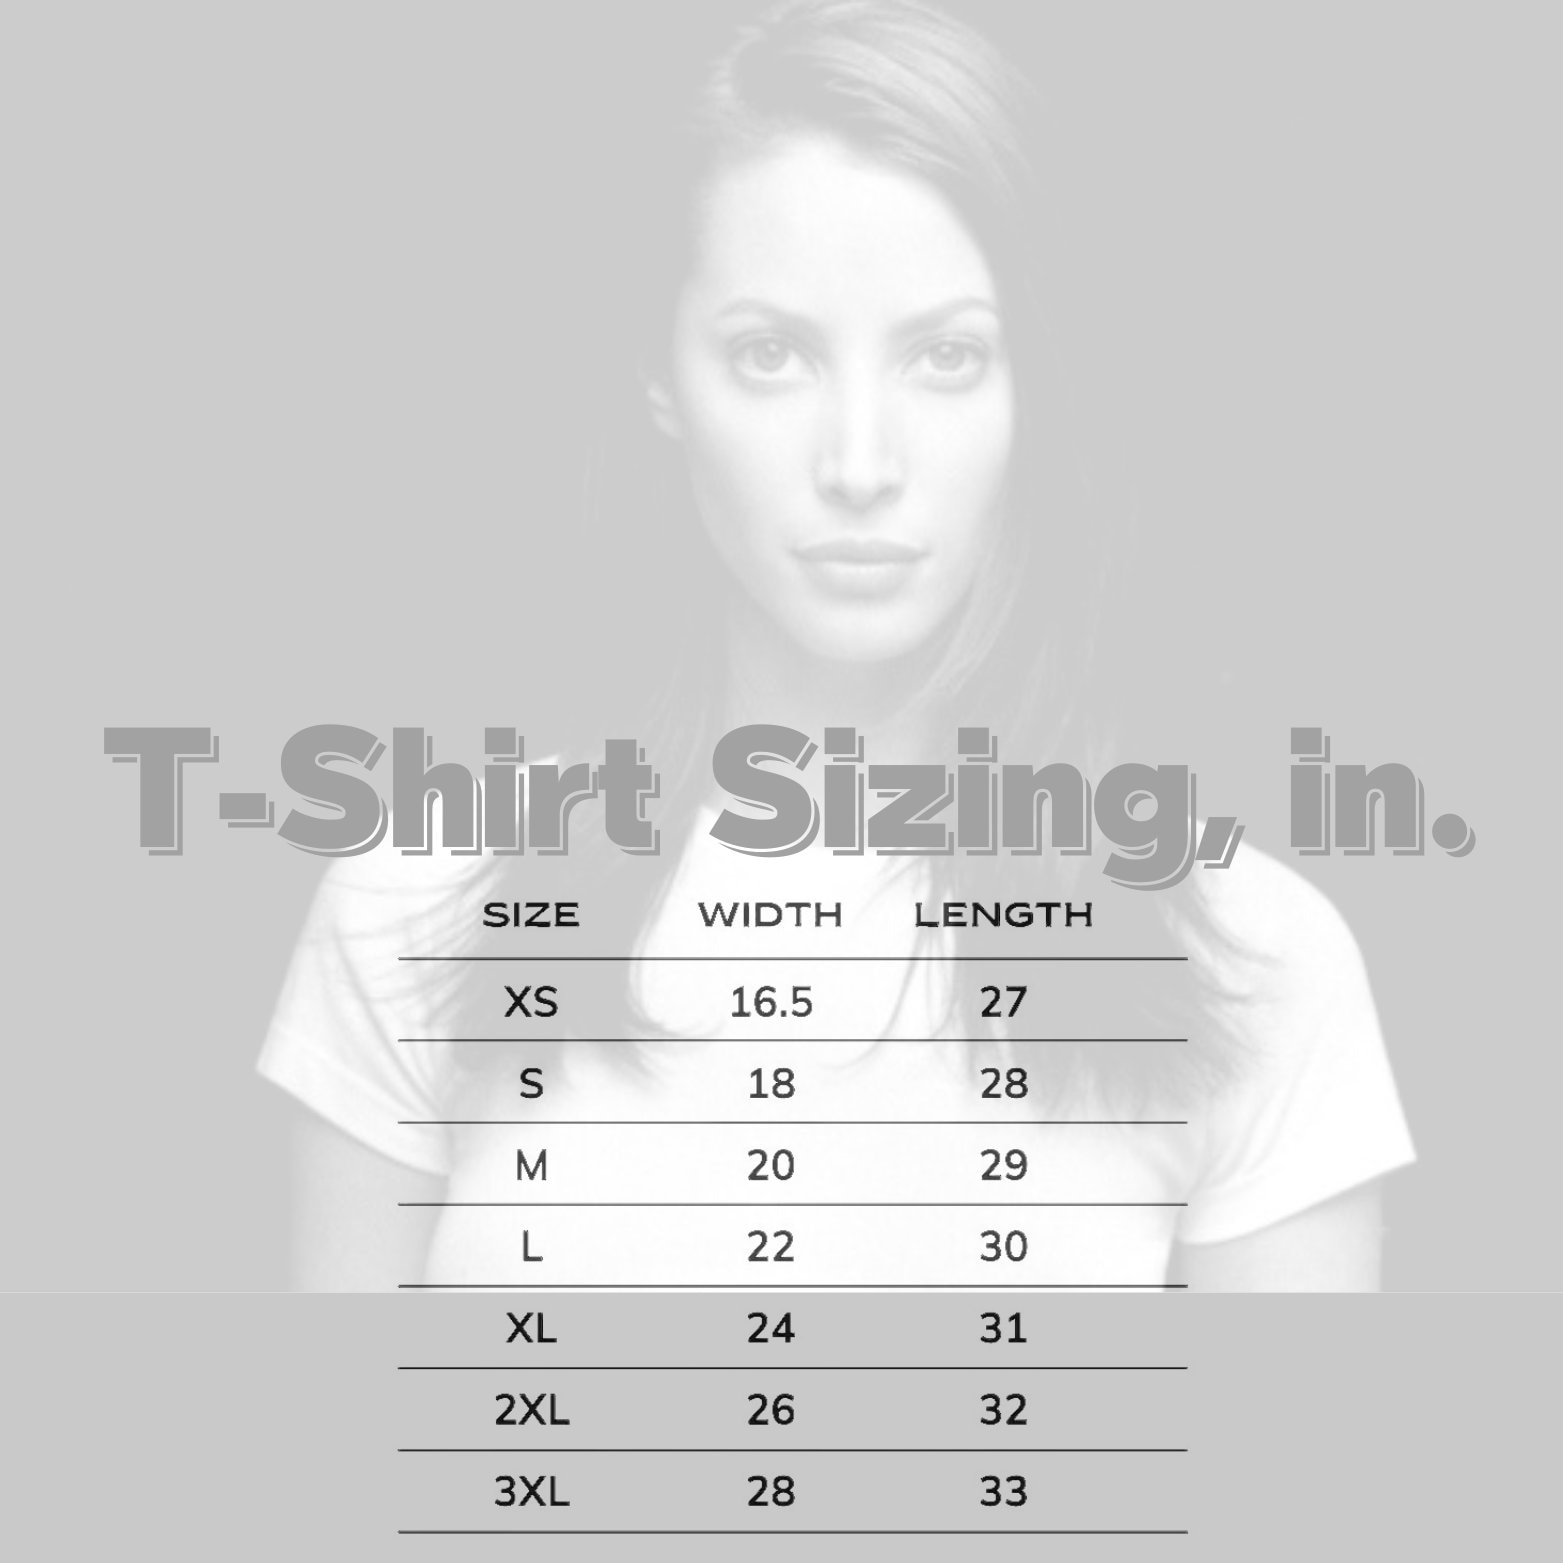 What's the difference between 3X and 3XL in shirt sizes? - Quora